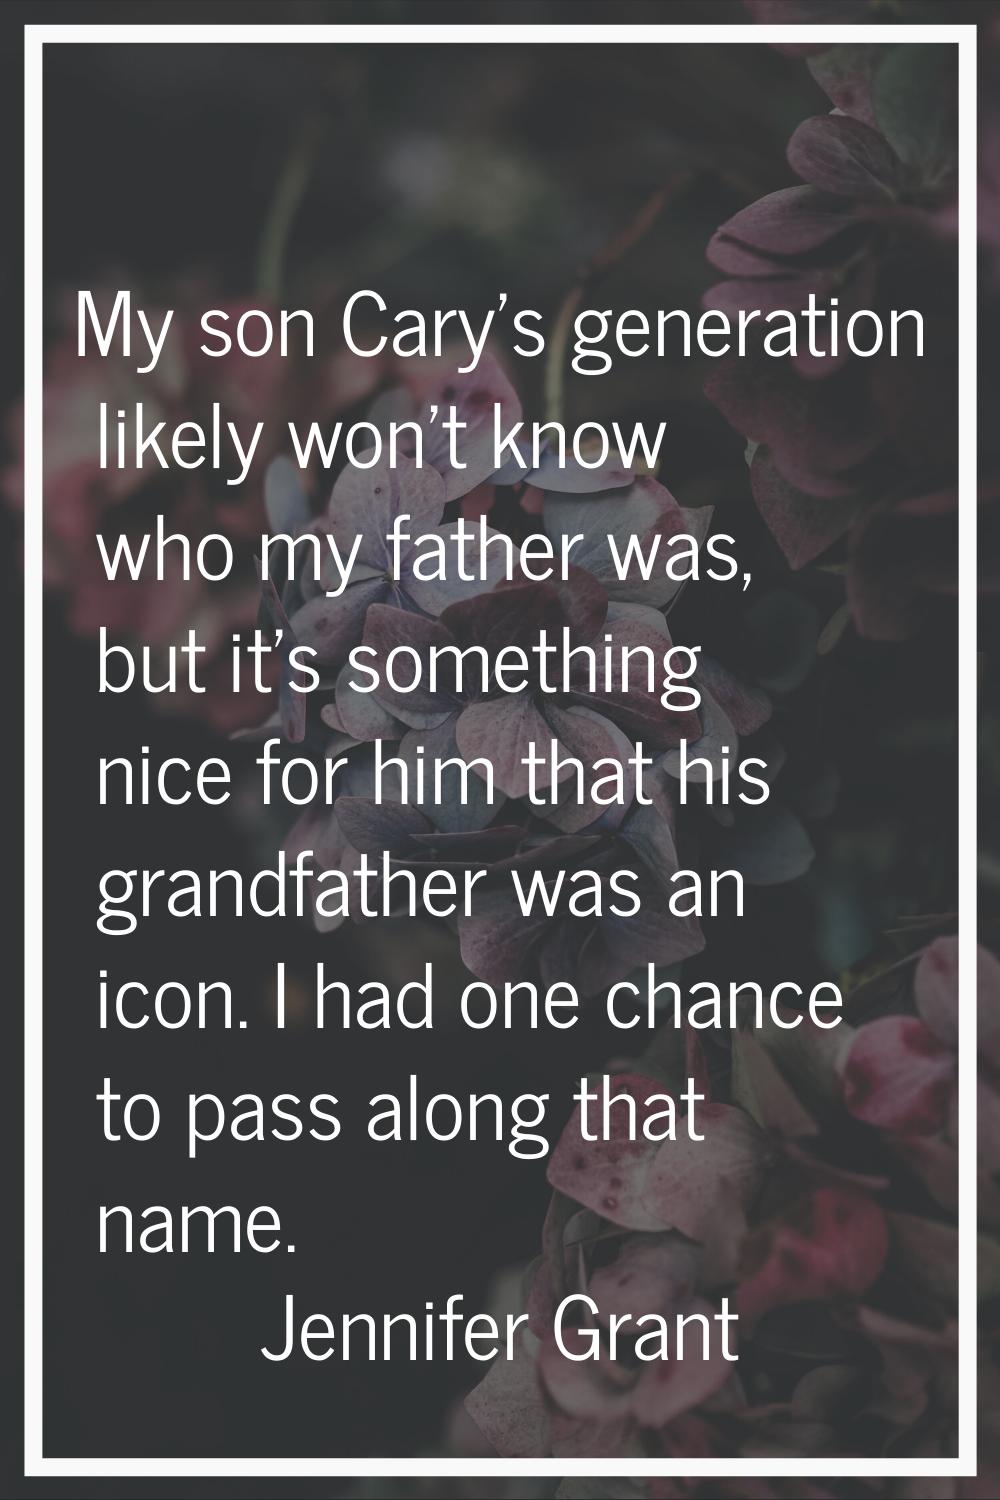 My son Cary's generation likely won't know who my father was, but it's something nice for him that 